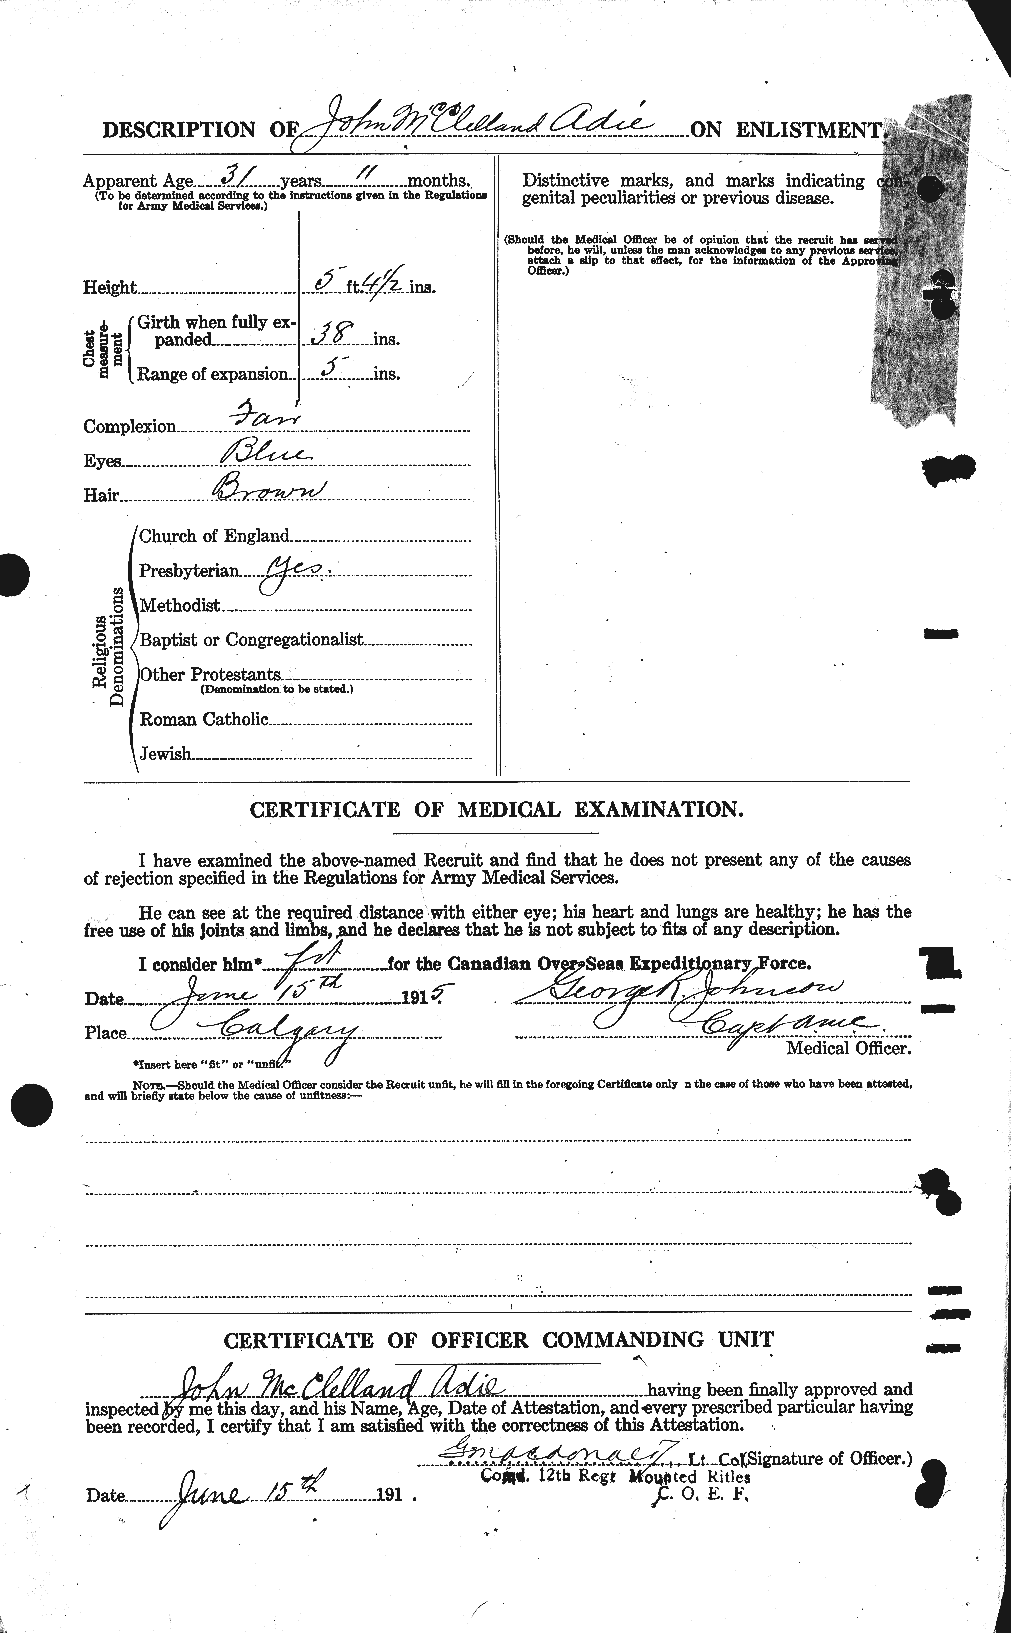 Personnel Records of the First World War - CEF 202819b